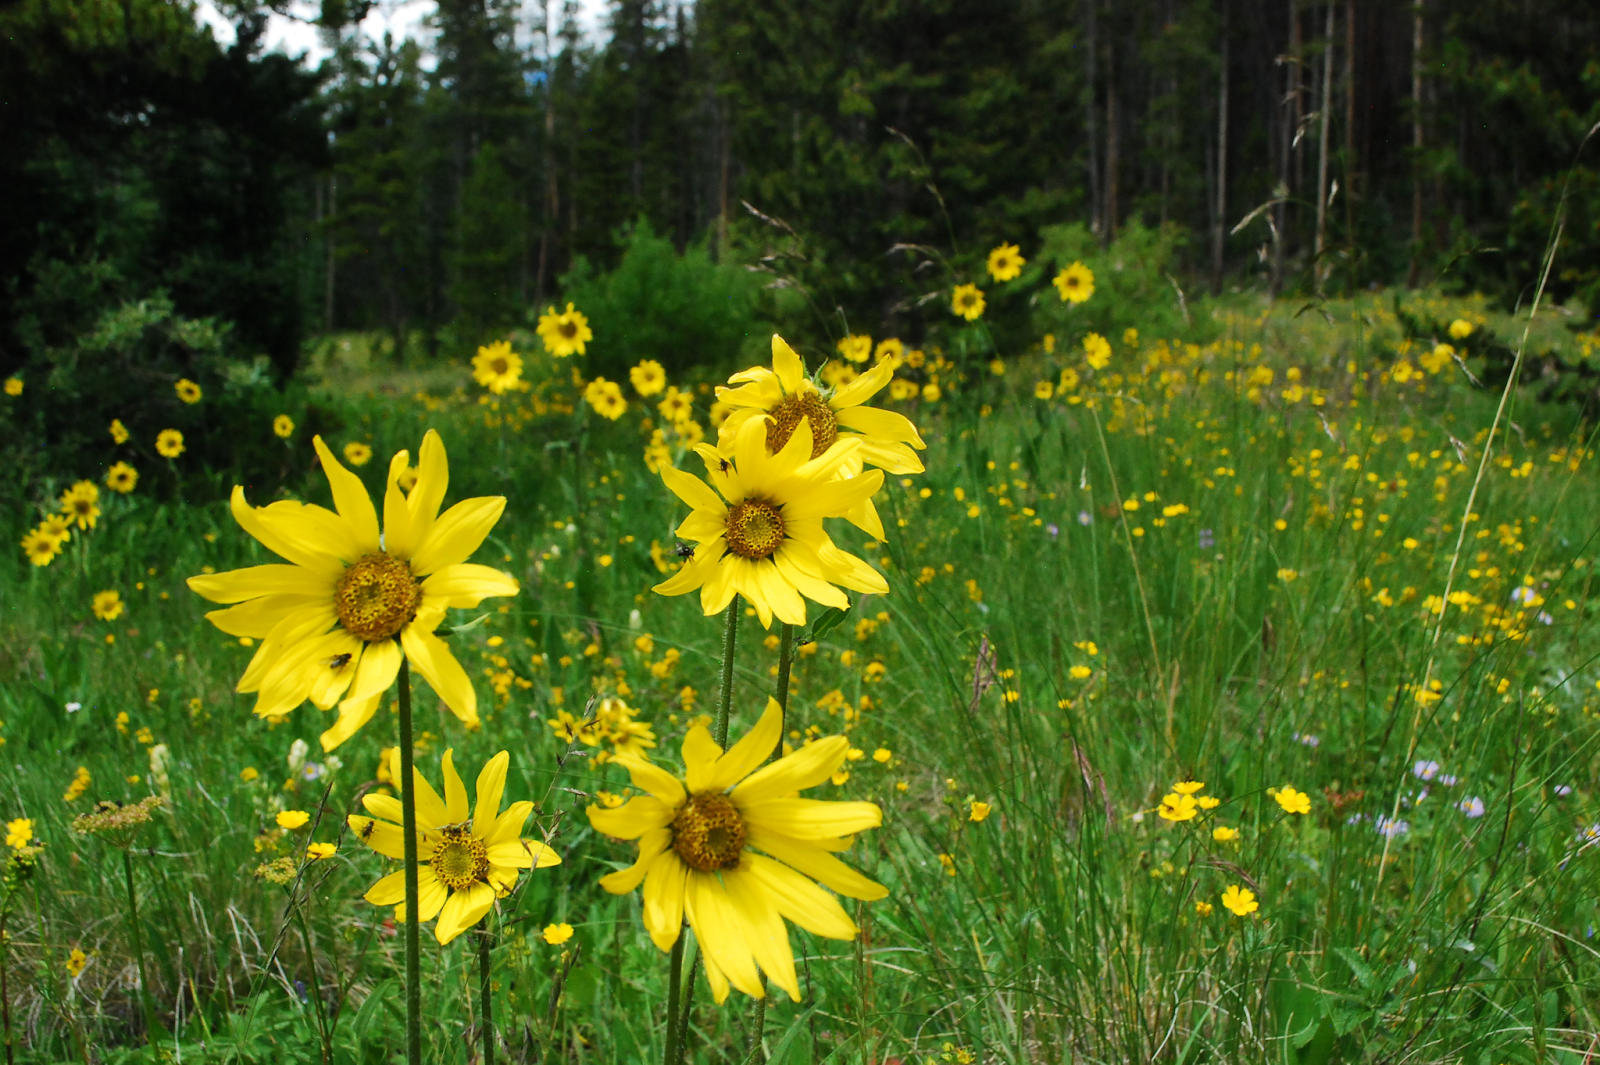 What is Arnica?